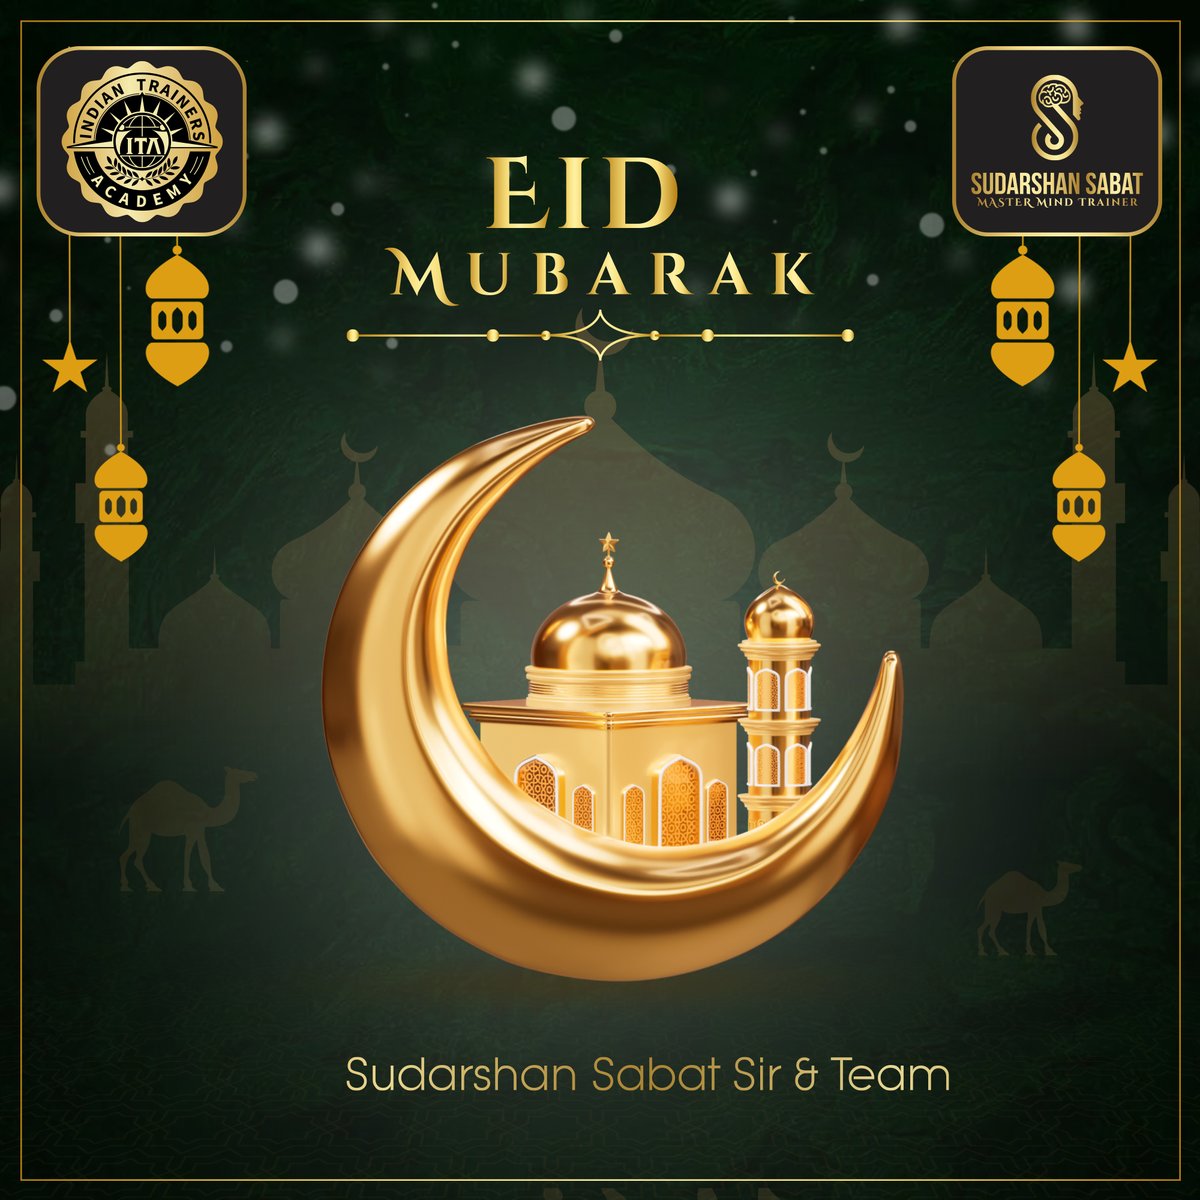 May this Eid bring you joy, happiness, and success in all your endeavors. Eid Mubarak!
.
.
.
.
.
#sudarshansabat #becomeatrainertoday #SuccessCoach #Growth #BusinessGrowth #MindTraining #Success #Life #MotivaionalVideo #inspirationalVideo #MindGrowth #TedTalks #Becomeatrainer